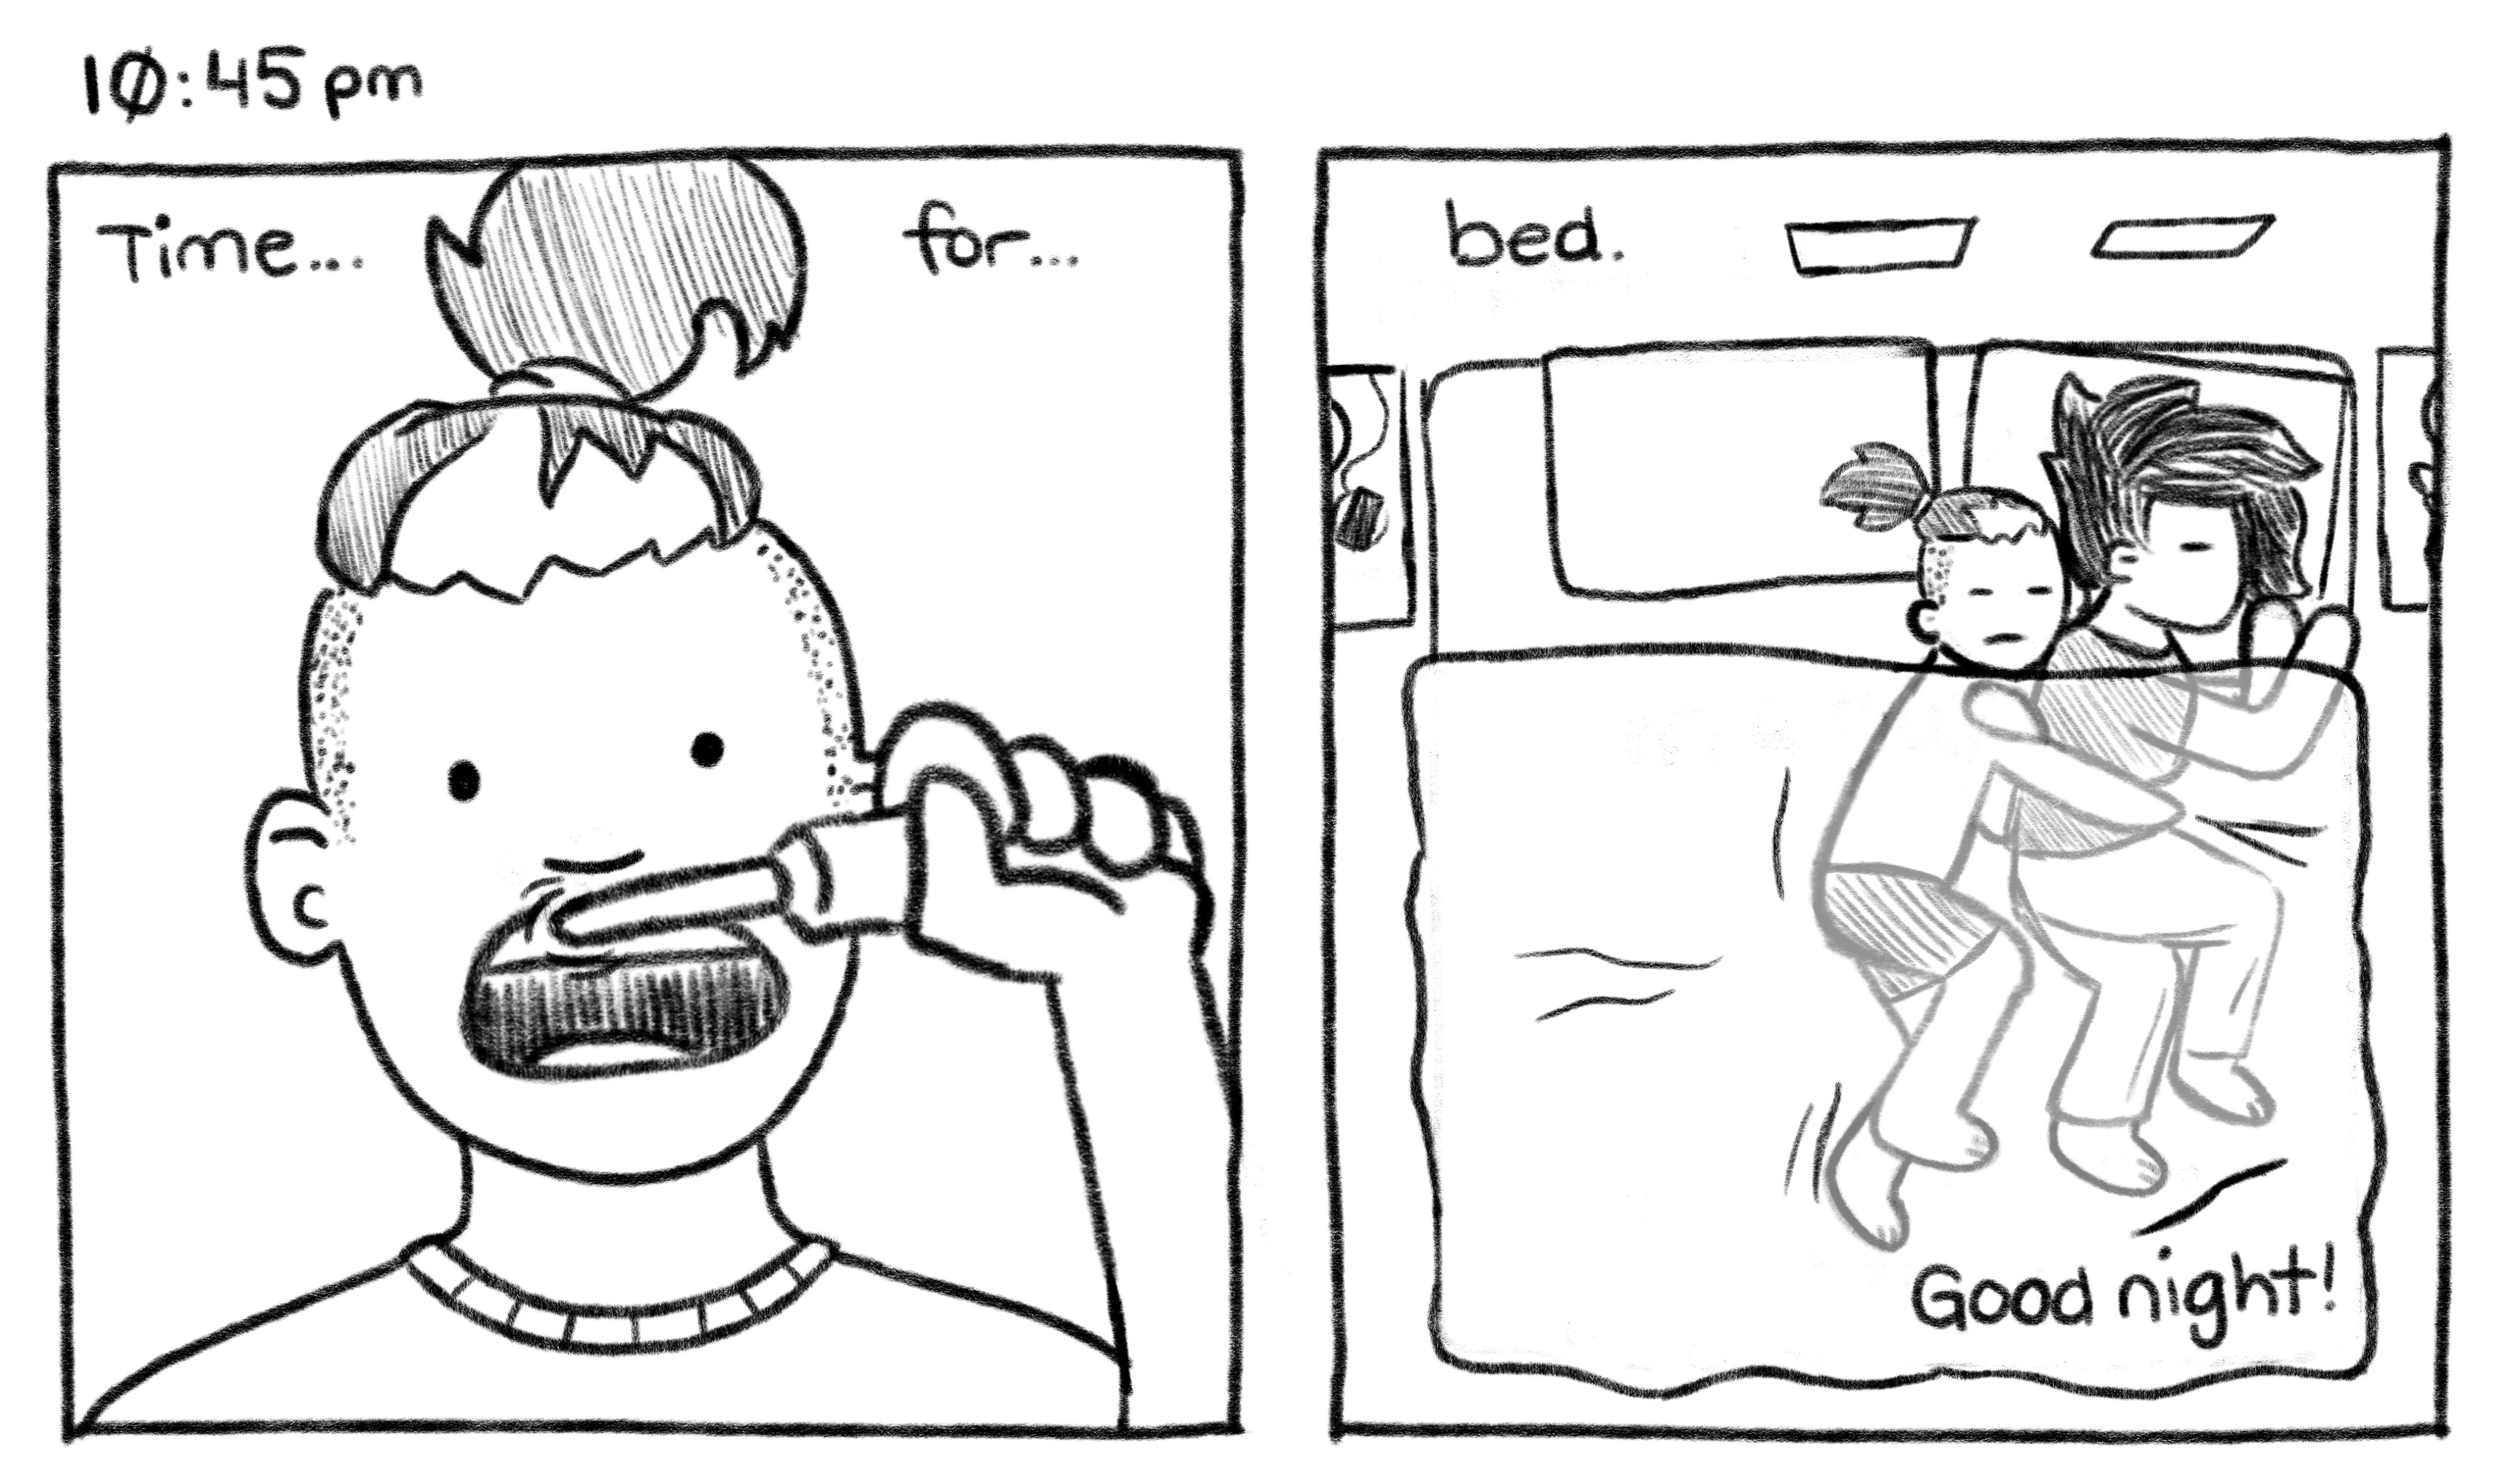 10:45pm; Jelly V.O.: Panel 1: Jelly is brushing his teeth, his hair is tied up in a pony tail. Time... for... Panel 2: Mel and Jelly are in bed, Jelly has rolled all the way over to Mel's side for cuddles. Jelly V.O.: bed. Good night!